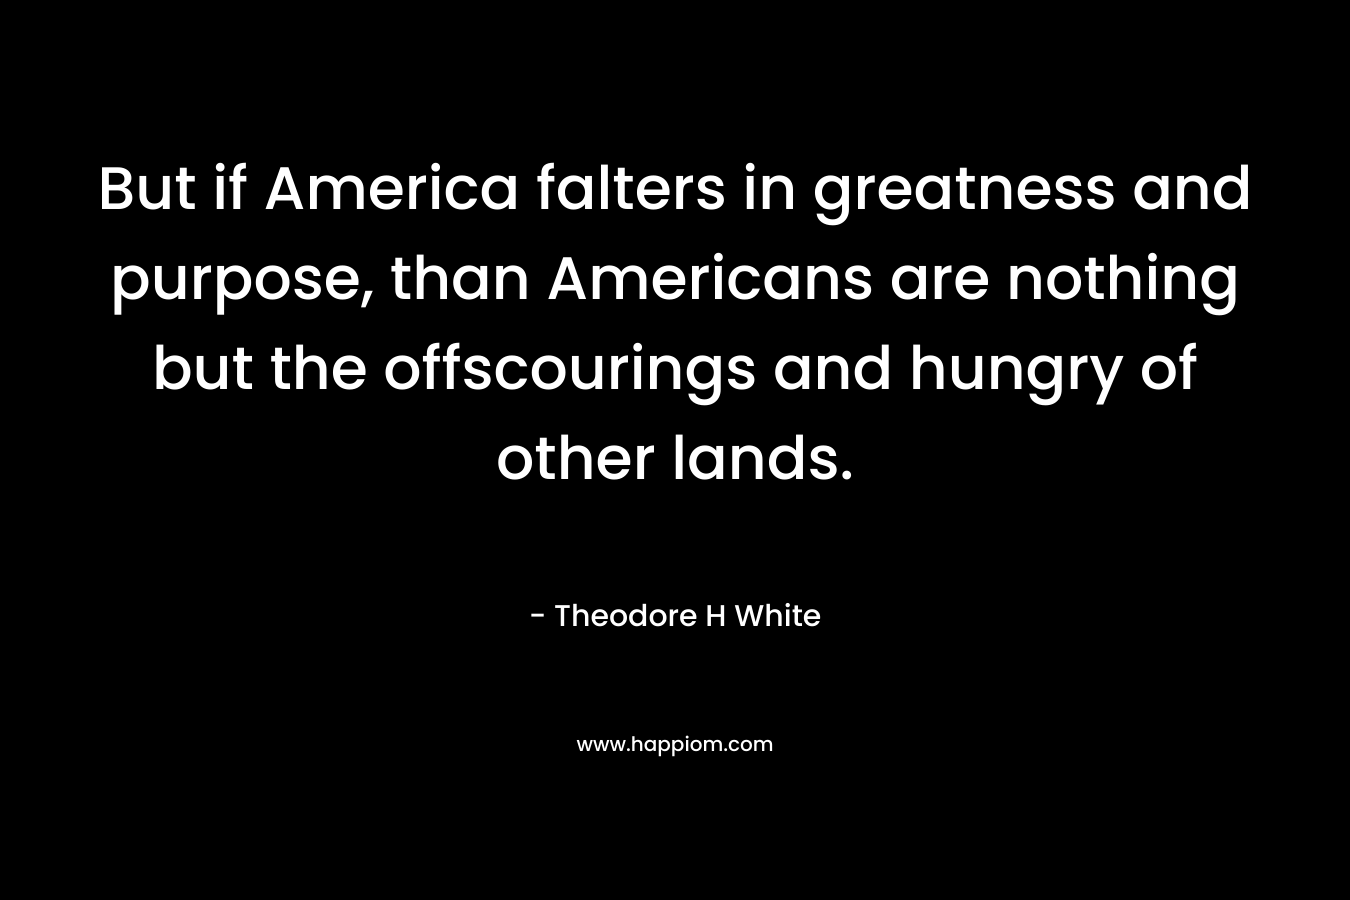 But if America falters in greatness and purpose, than Americans are nothing but the offscourings and hungry of other lands.